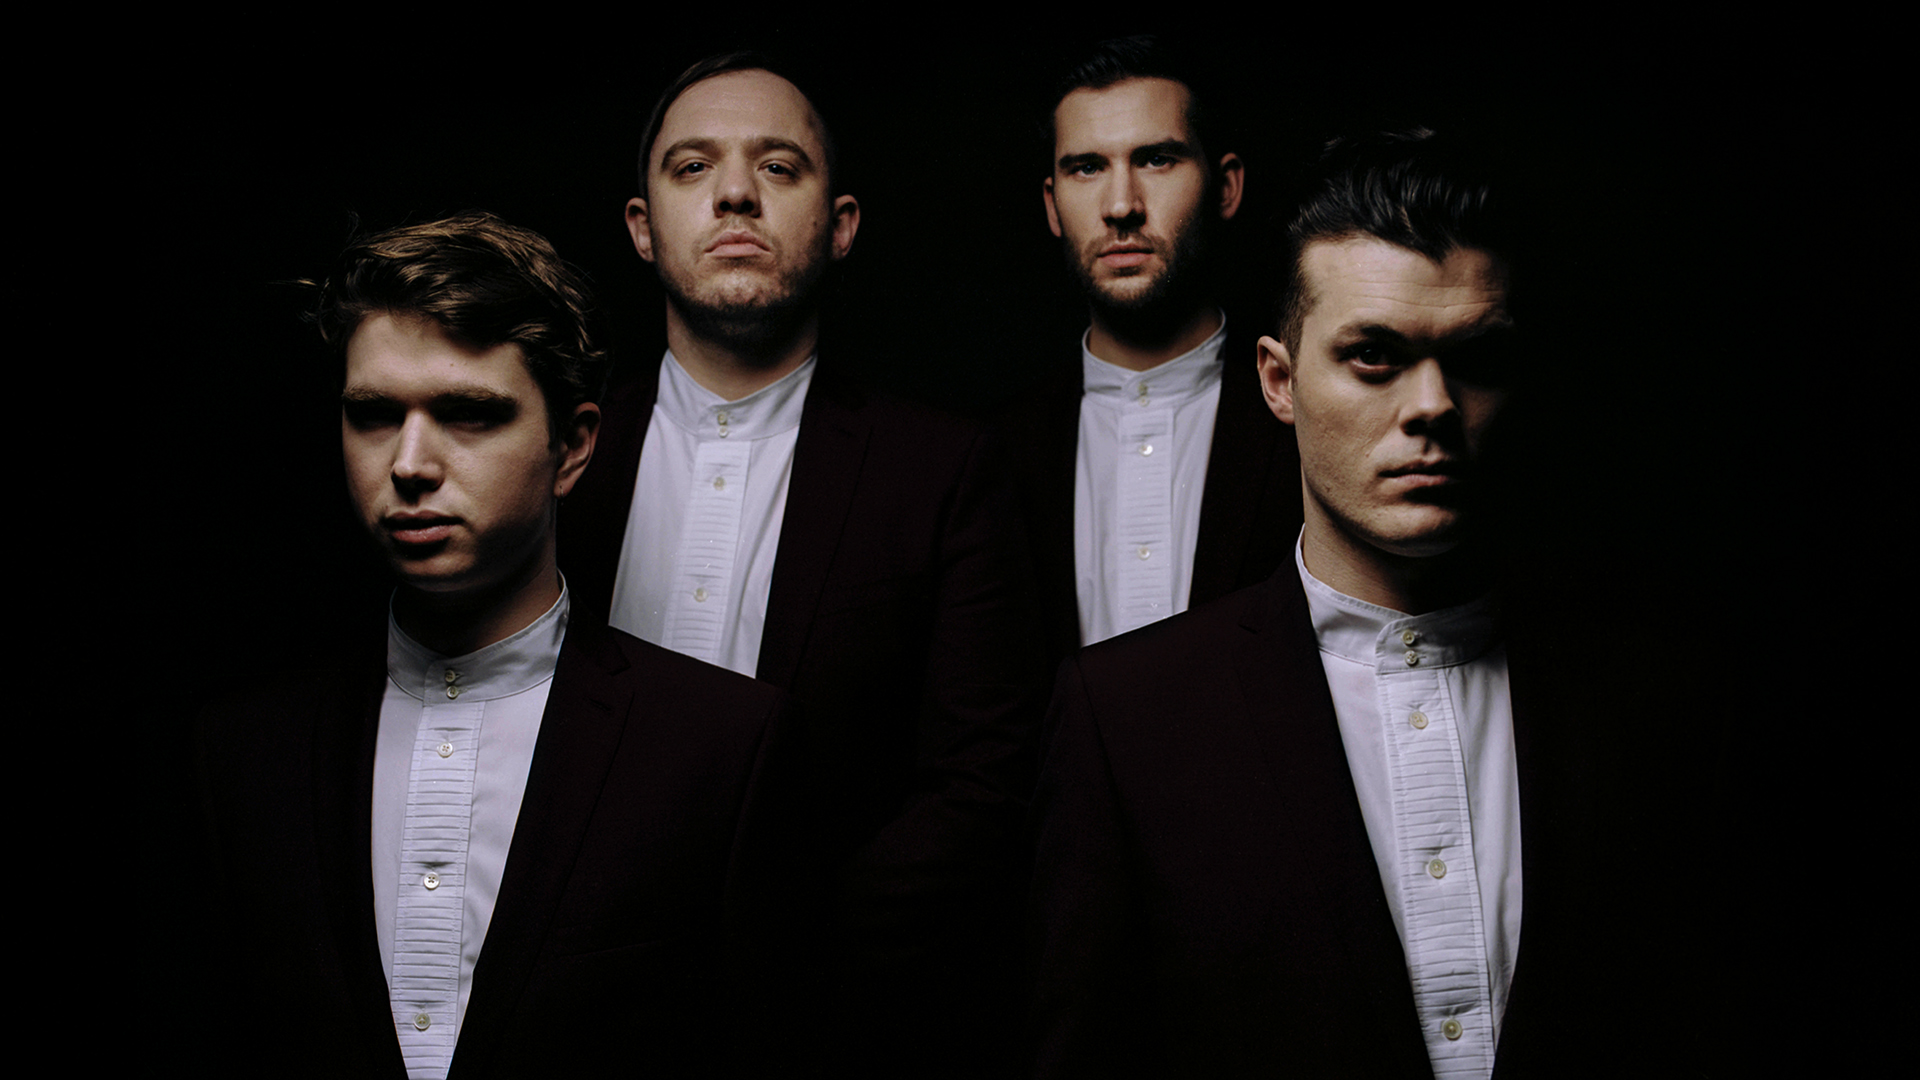 Everything Everything band press image from  ash.collins@sonymusic.com